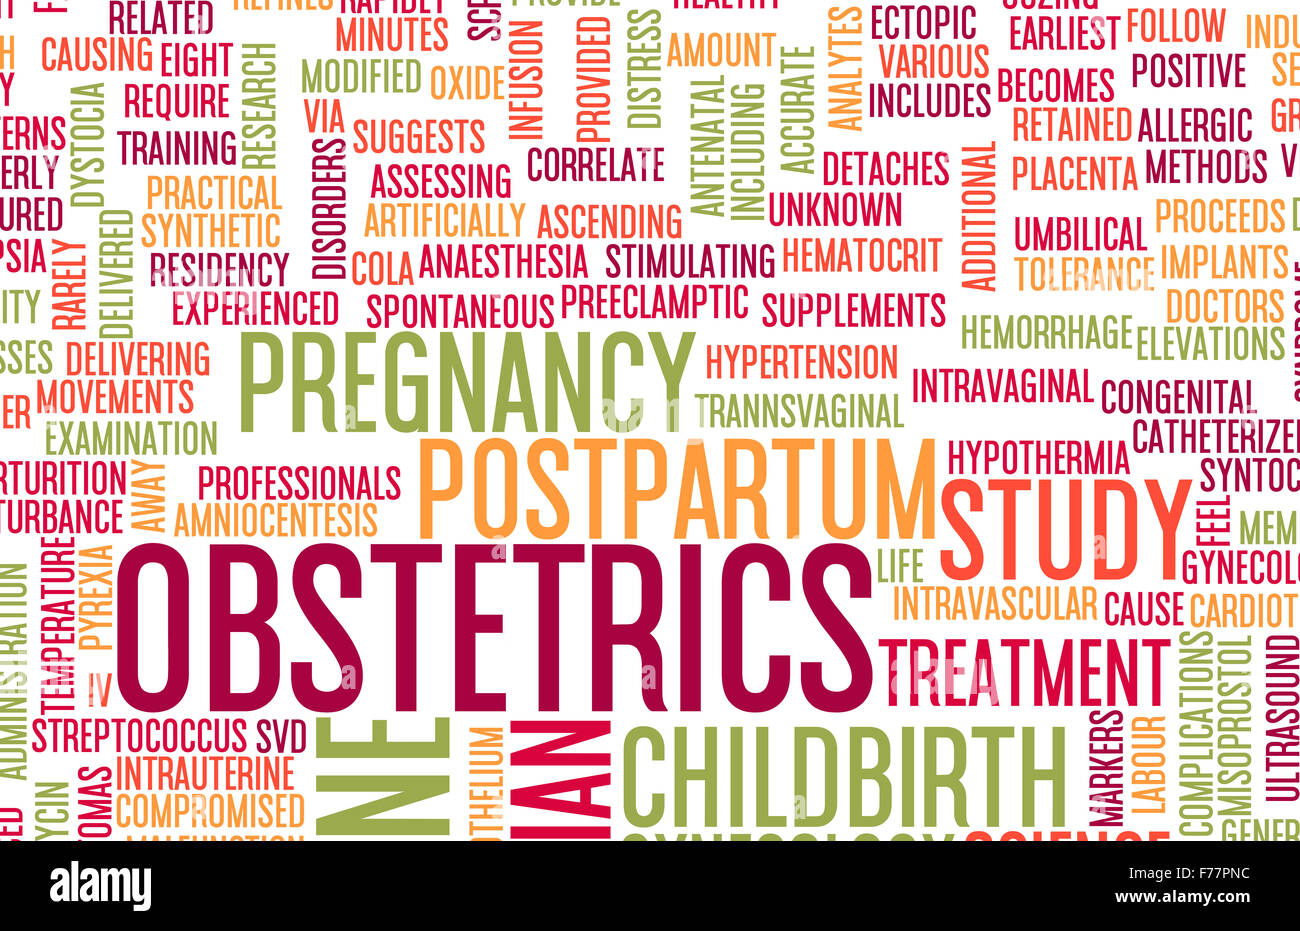 Obstetrics or Obstetrician Medical Field Specialty As Art Stock Photo